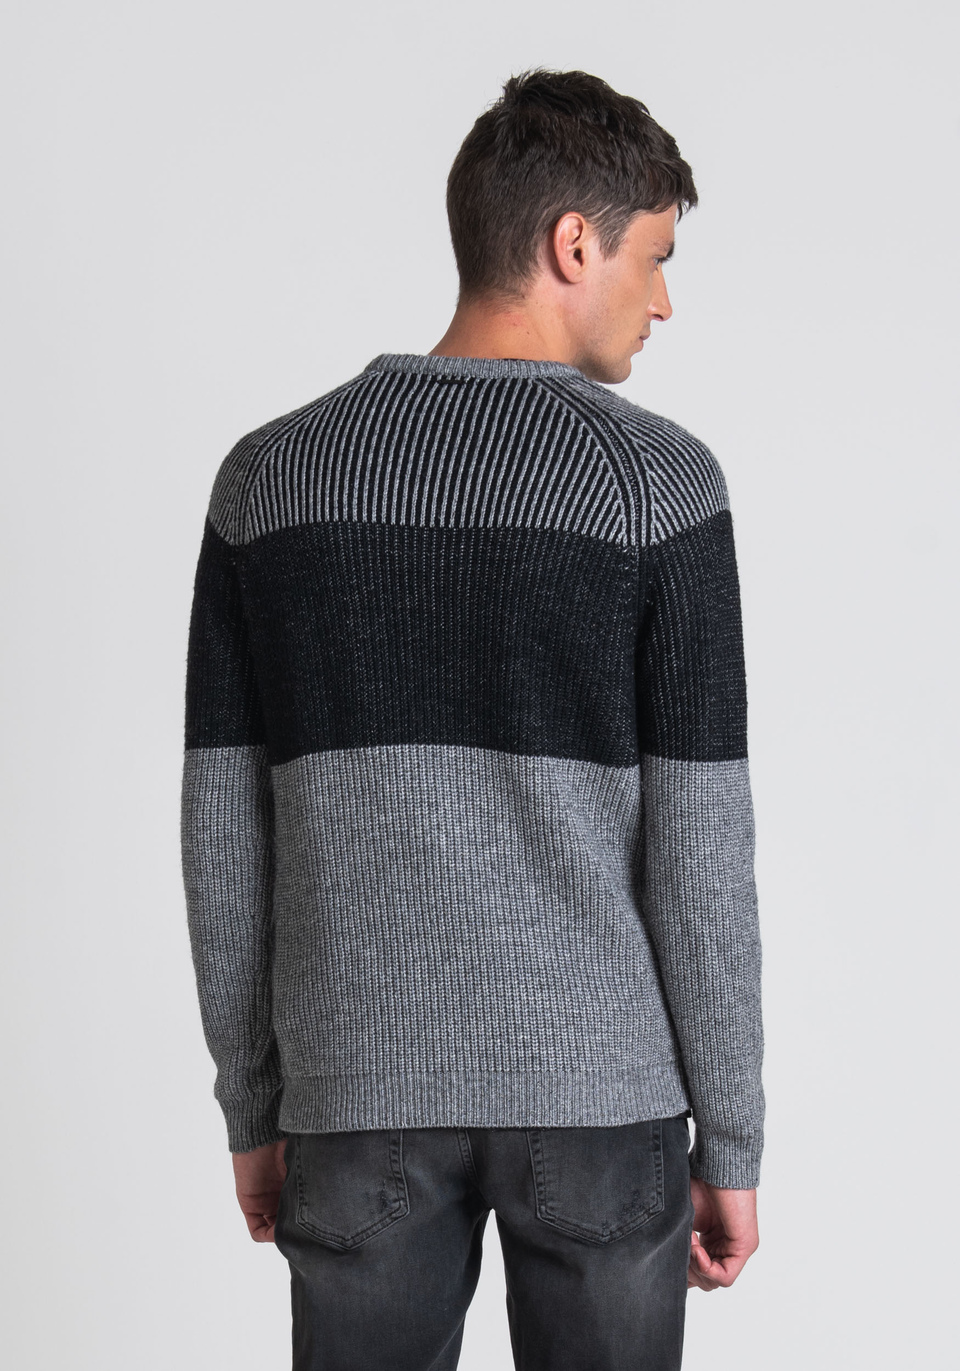 PLAIN-KNIT SWEATER MADE FROM A WOOL-BLEND YARN - Antony Morato Online Shop